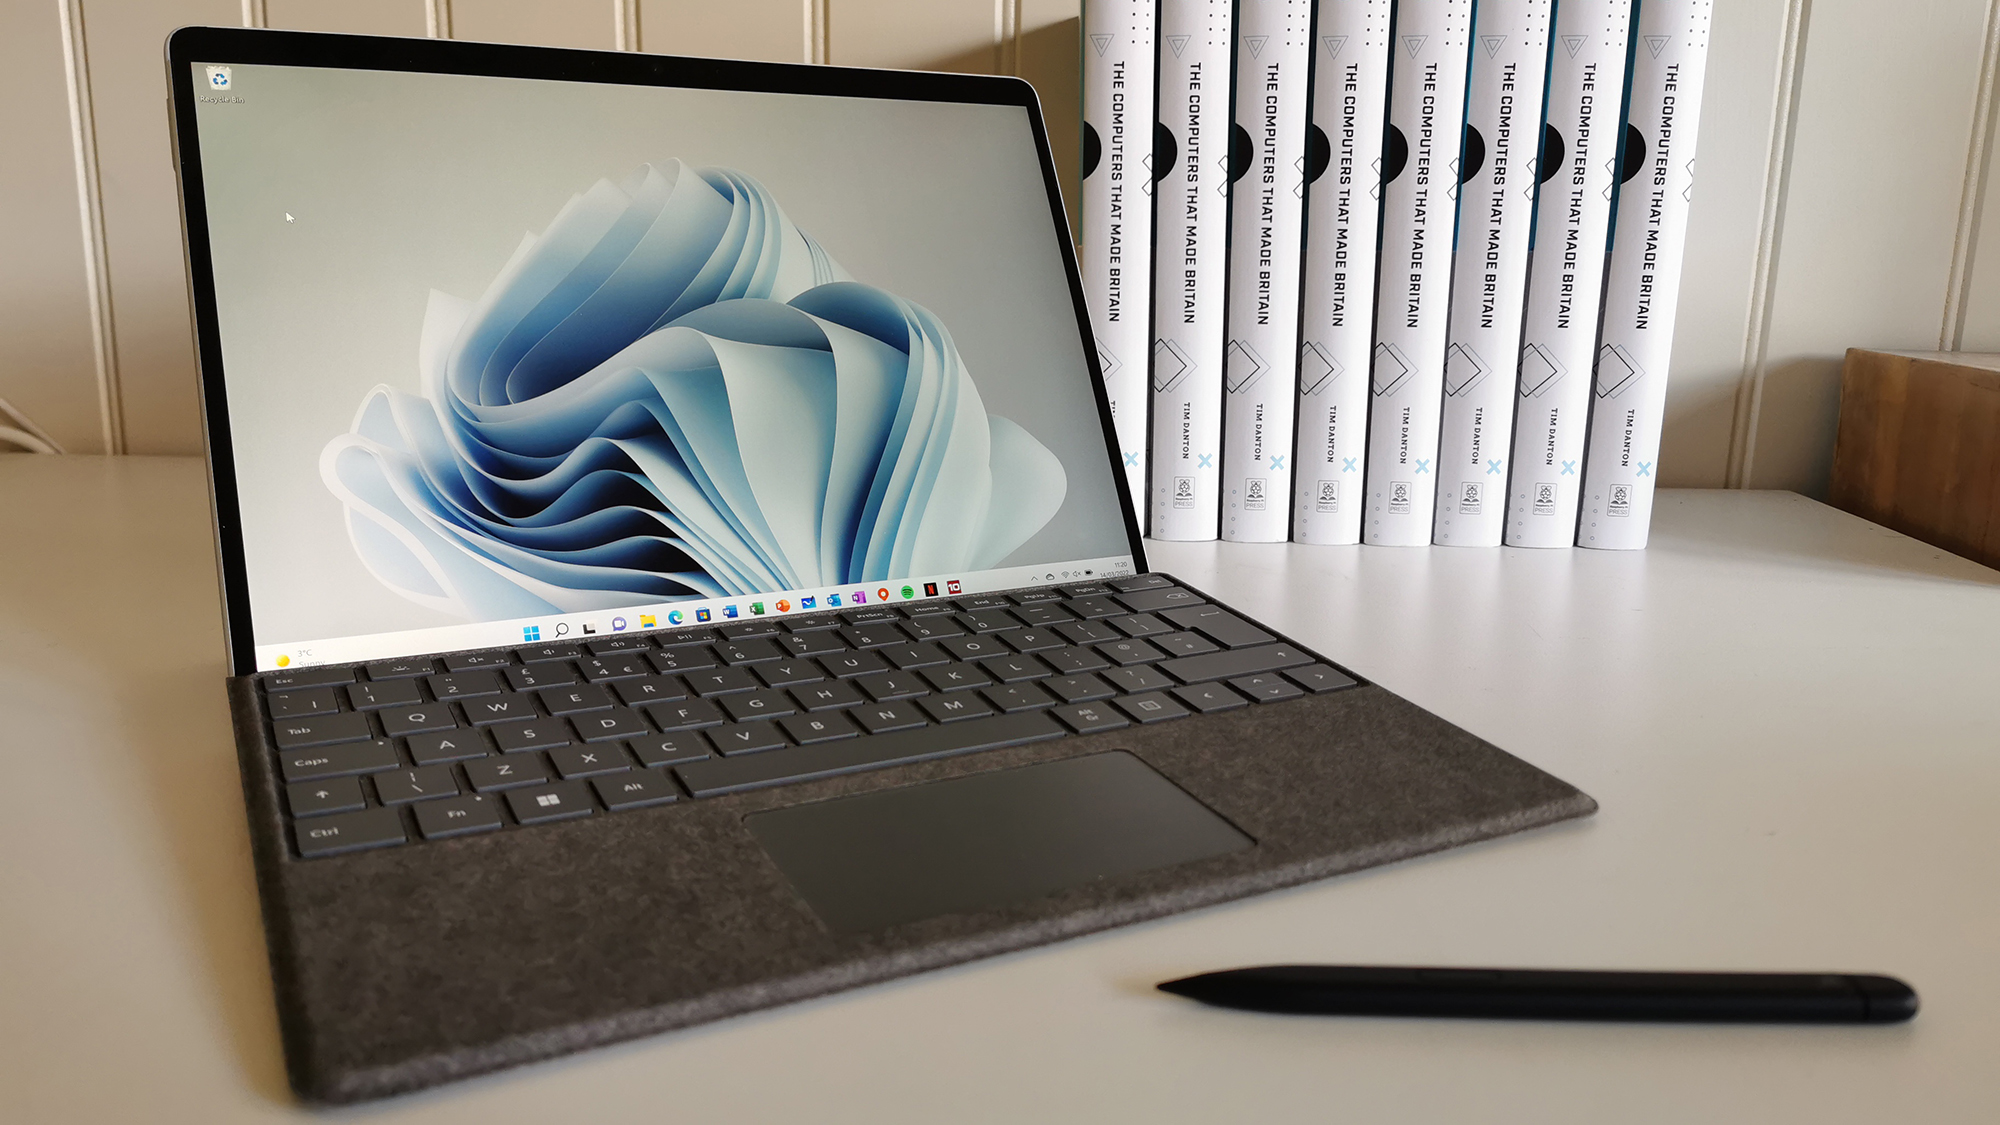 Microsoft Surface Pro 7 Review 